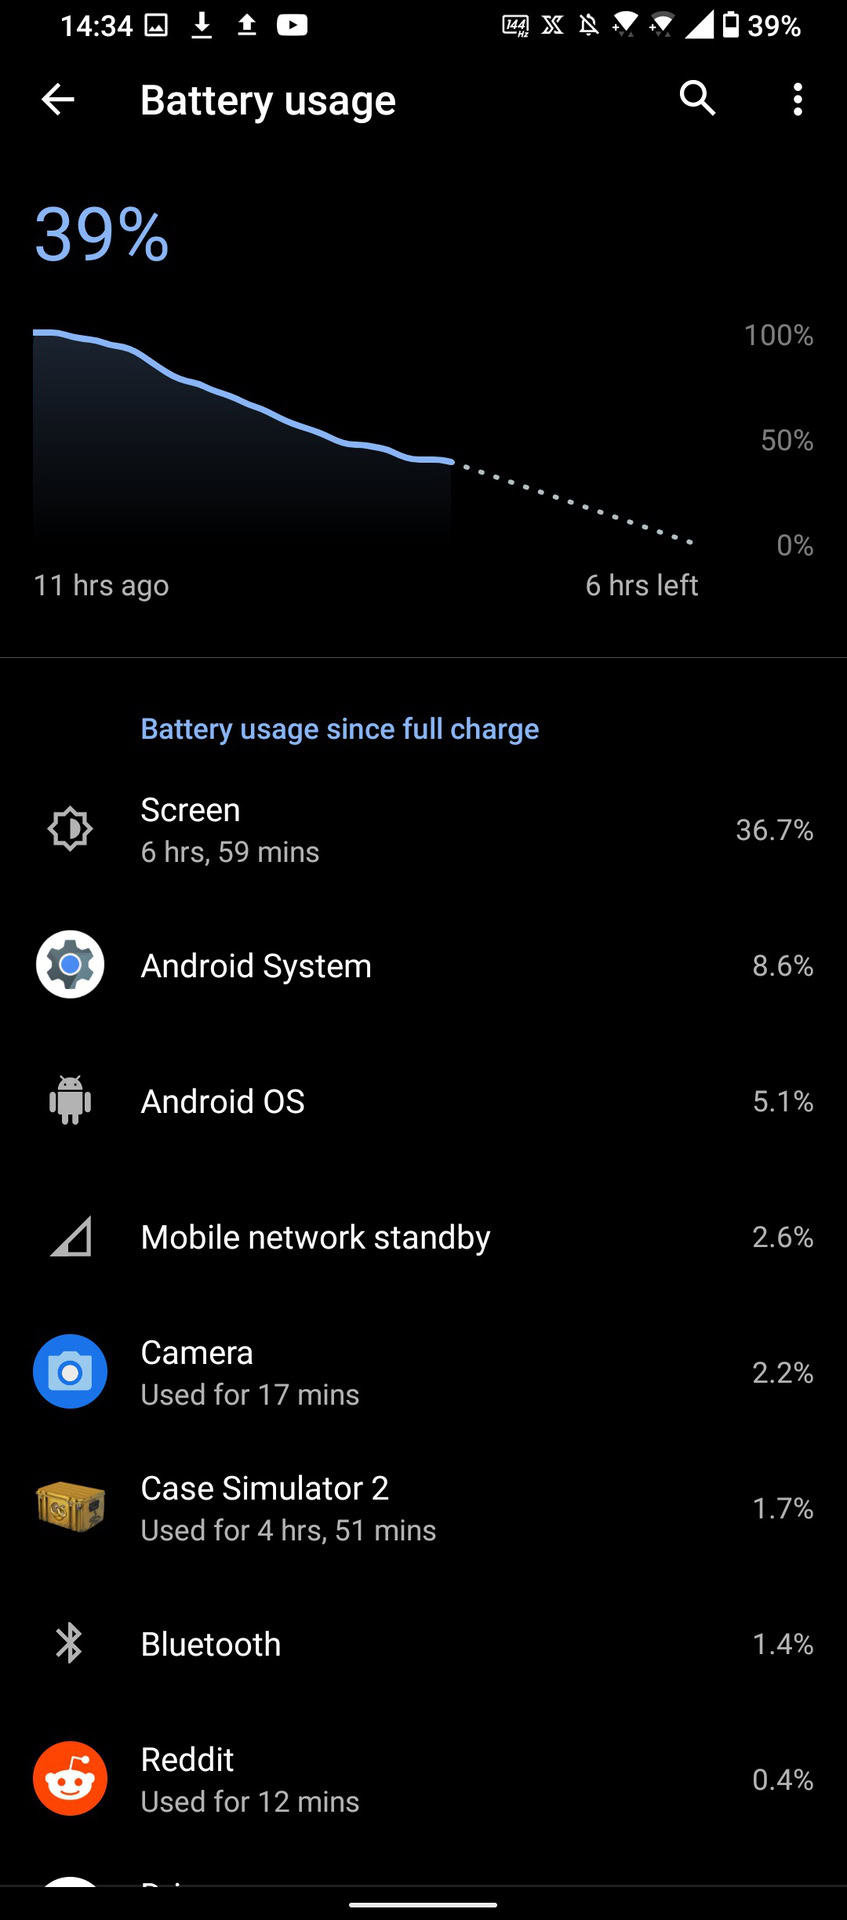 Asus ROG Phone 5 Battery life over bery heavy day